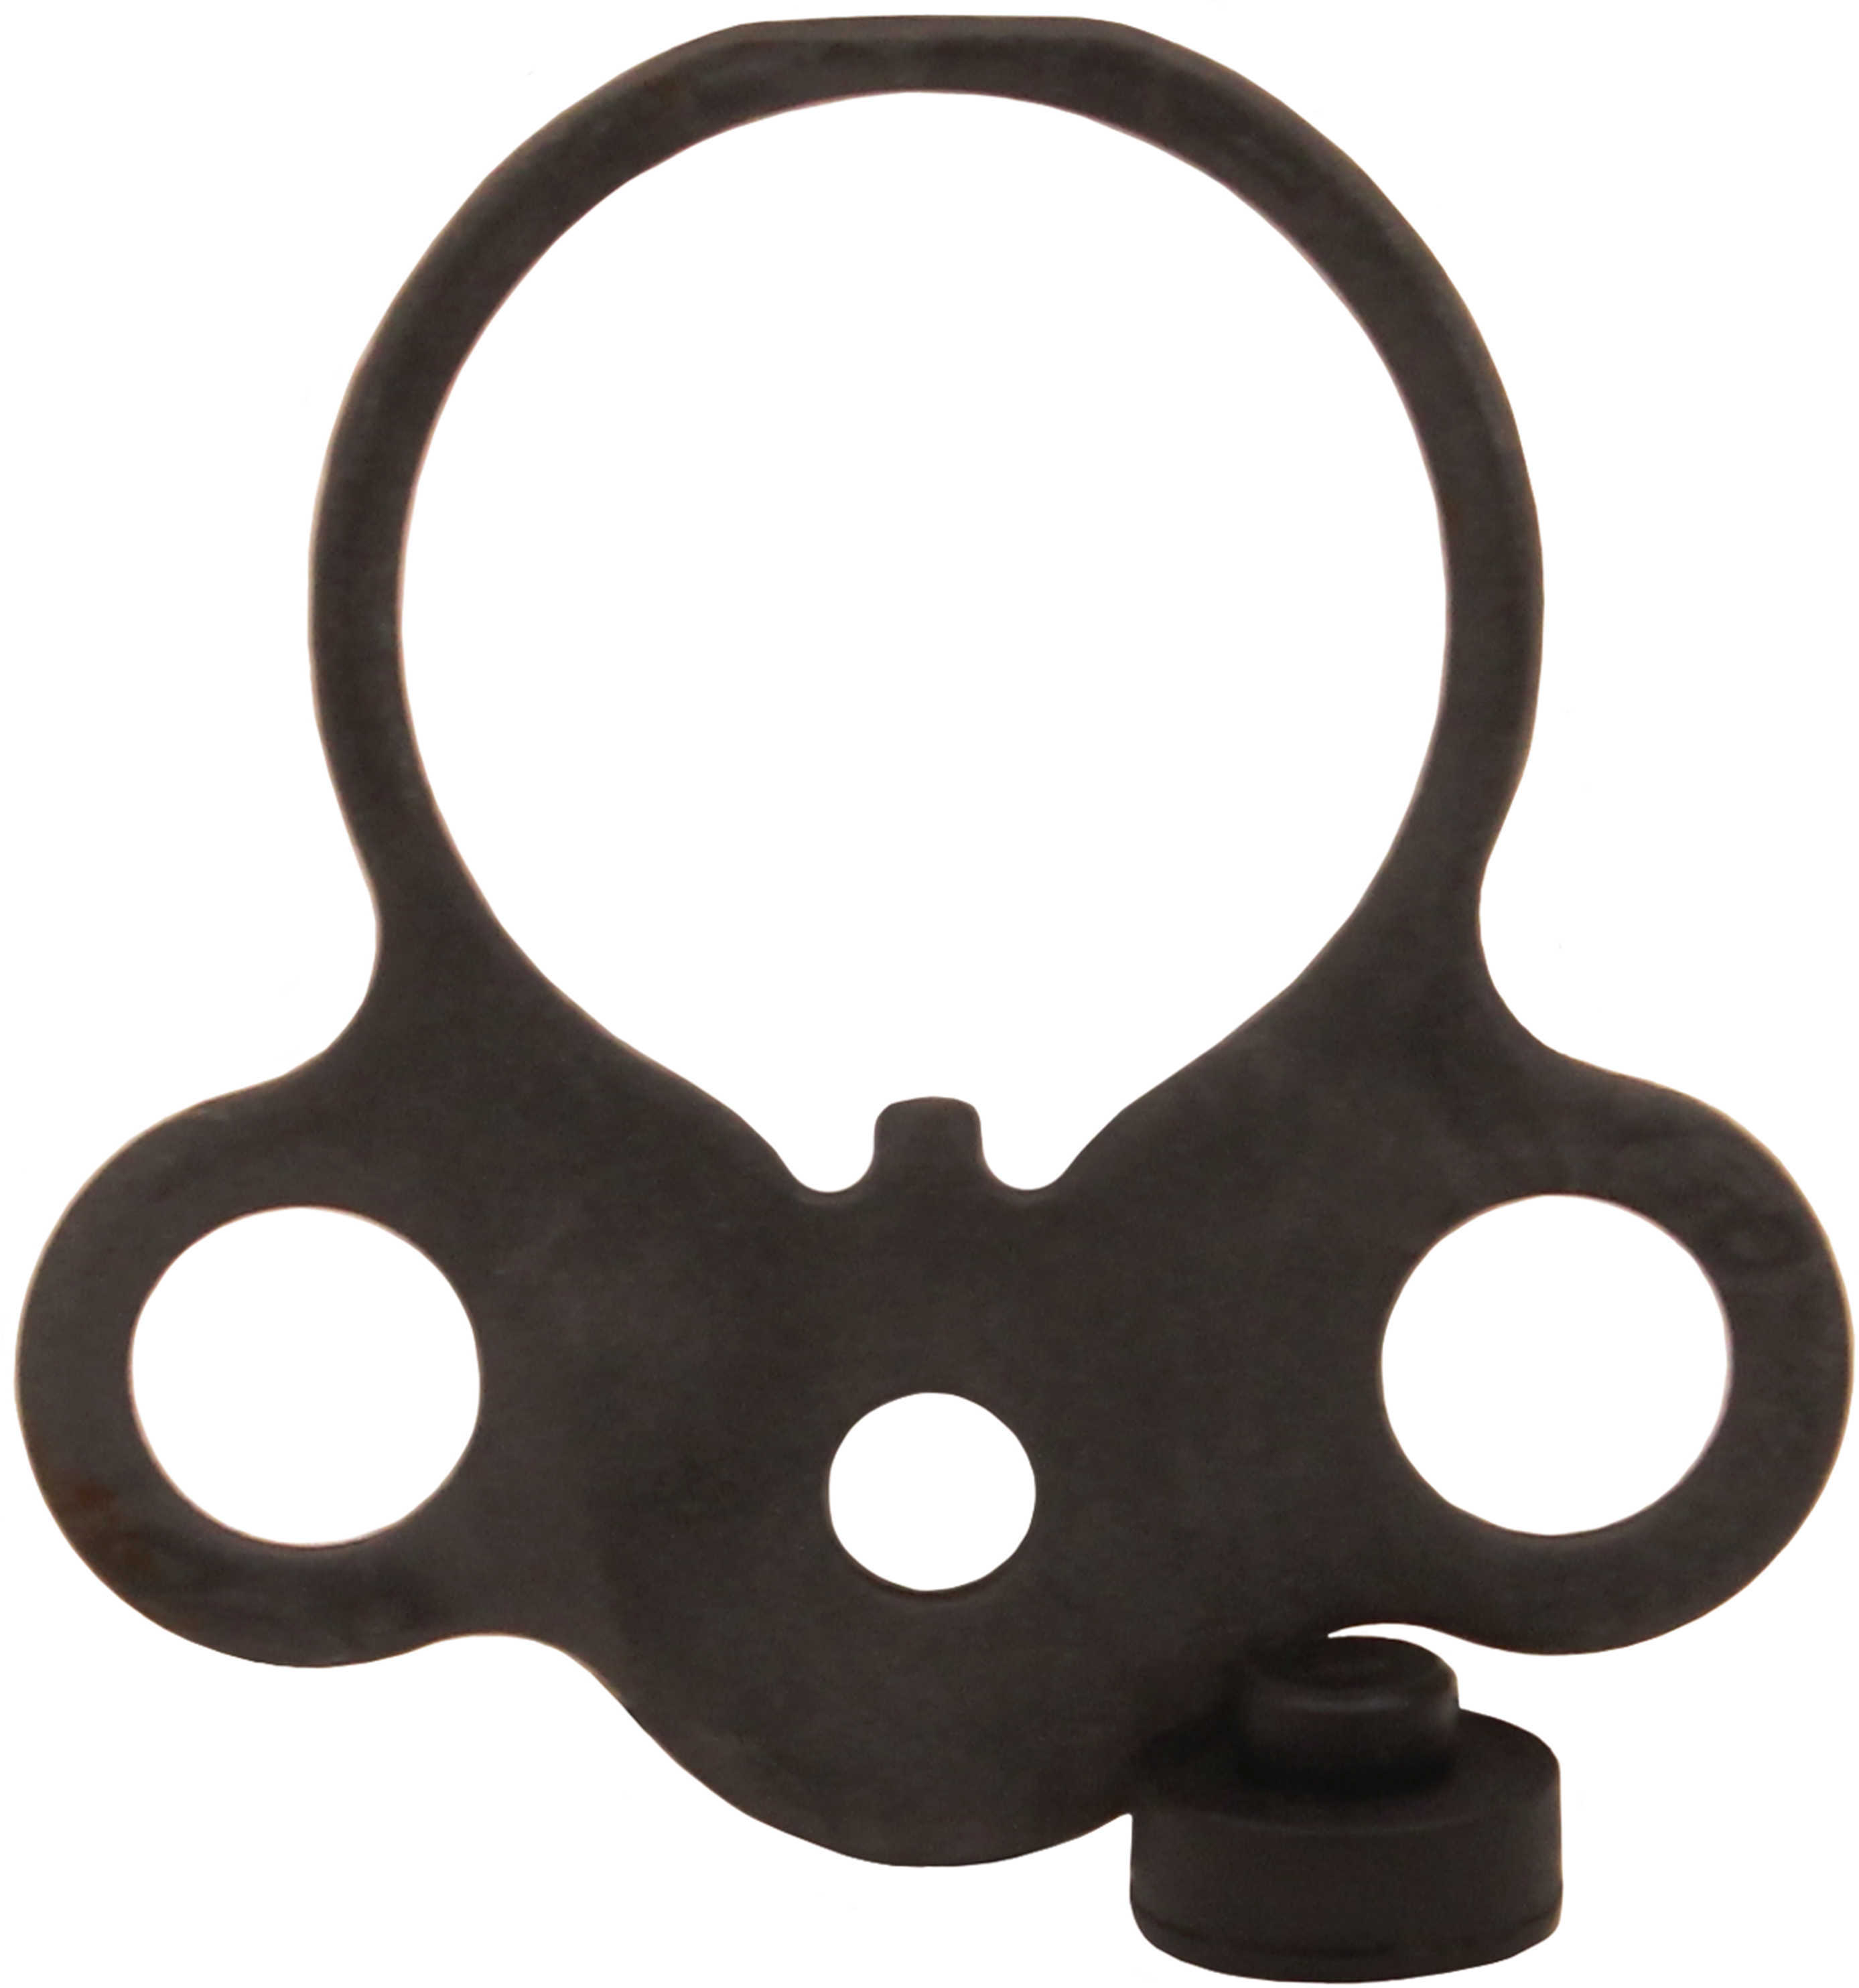 AR-15 Ambidextrous Dual Loop Sling Attachment Plate